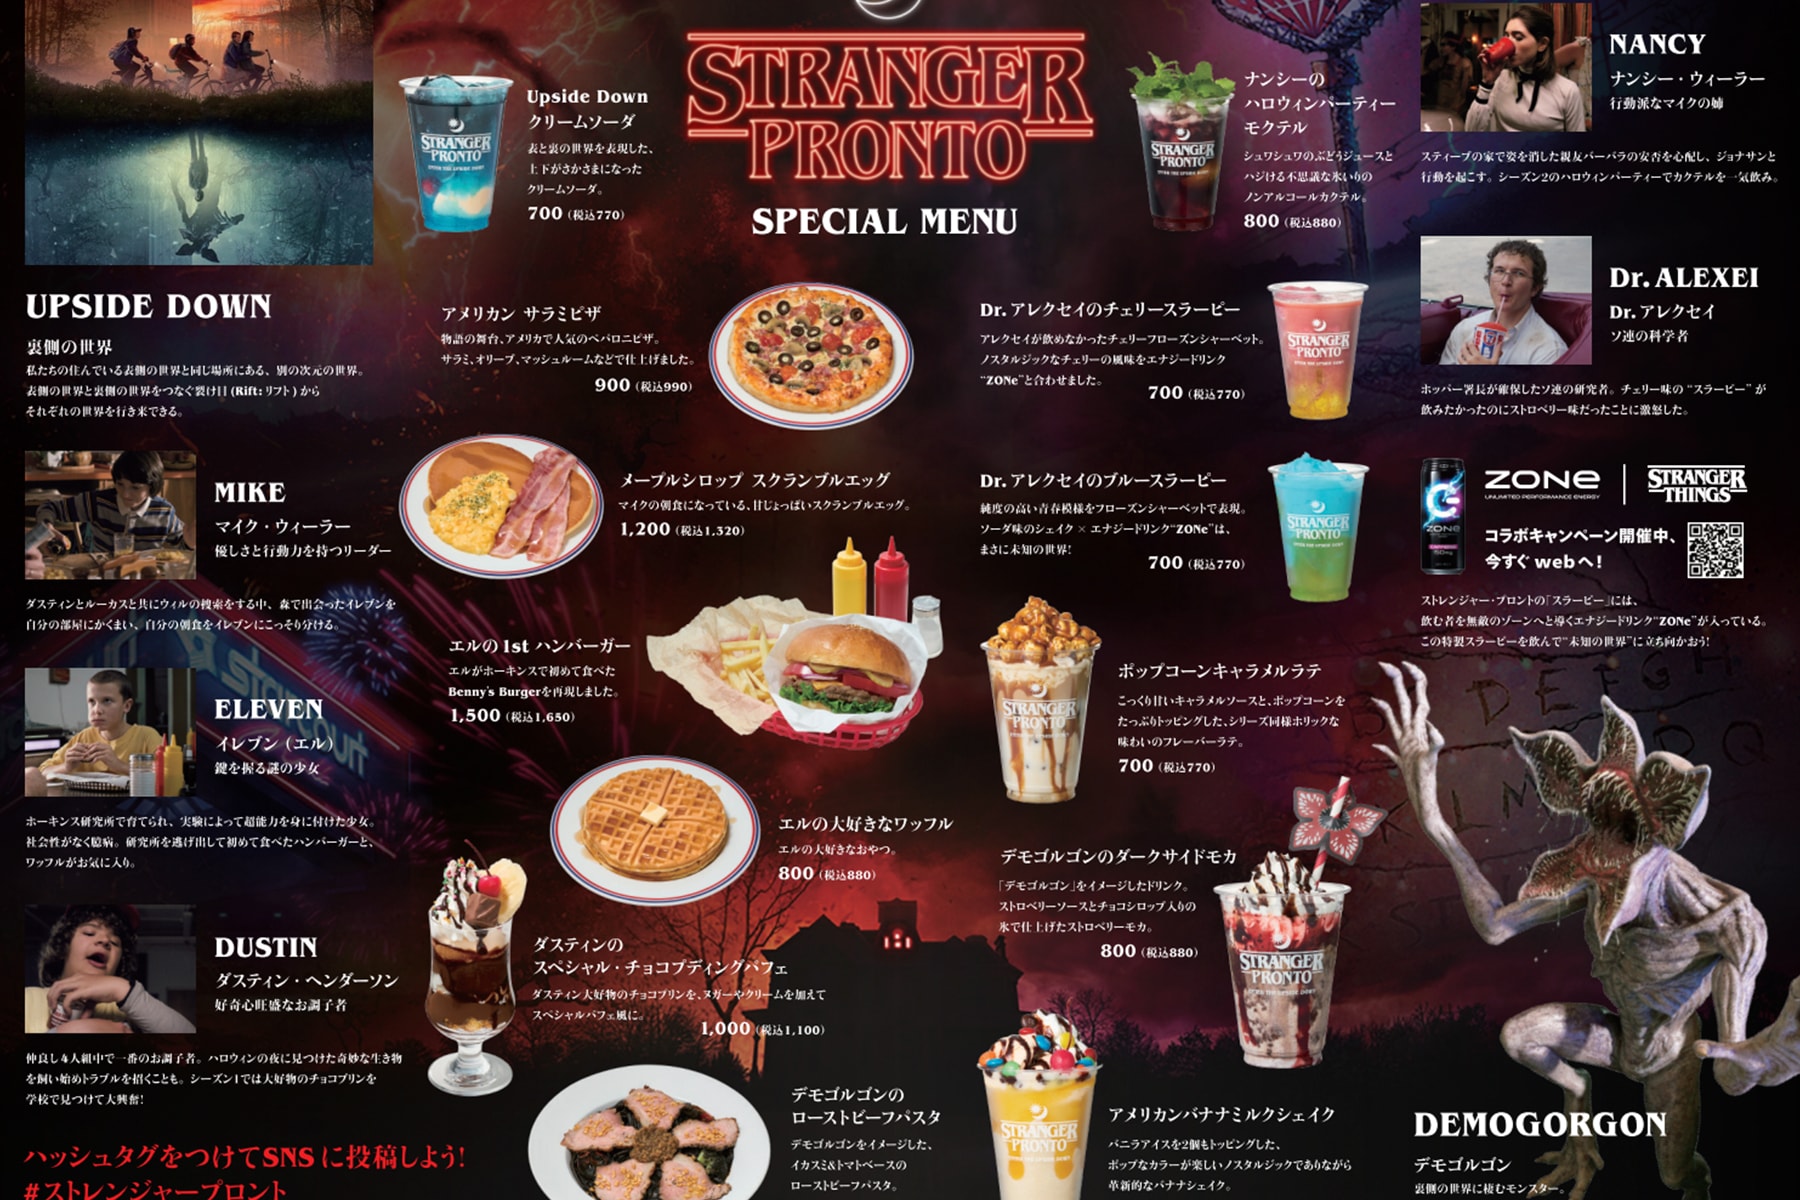 Pronto Japan Netflix Japan Stranger Things cafe attractions travel coffee bar food upside down 